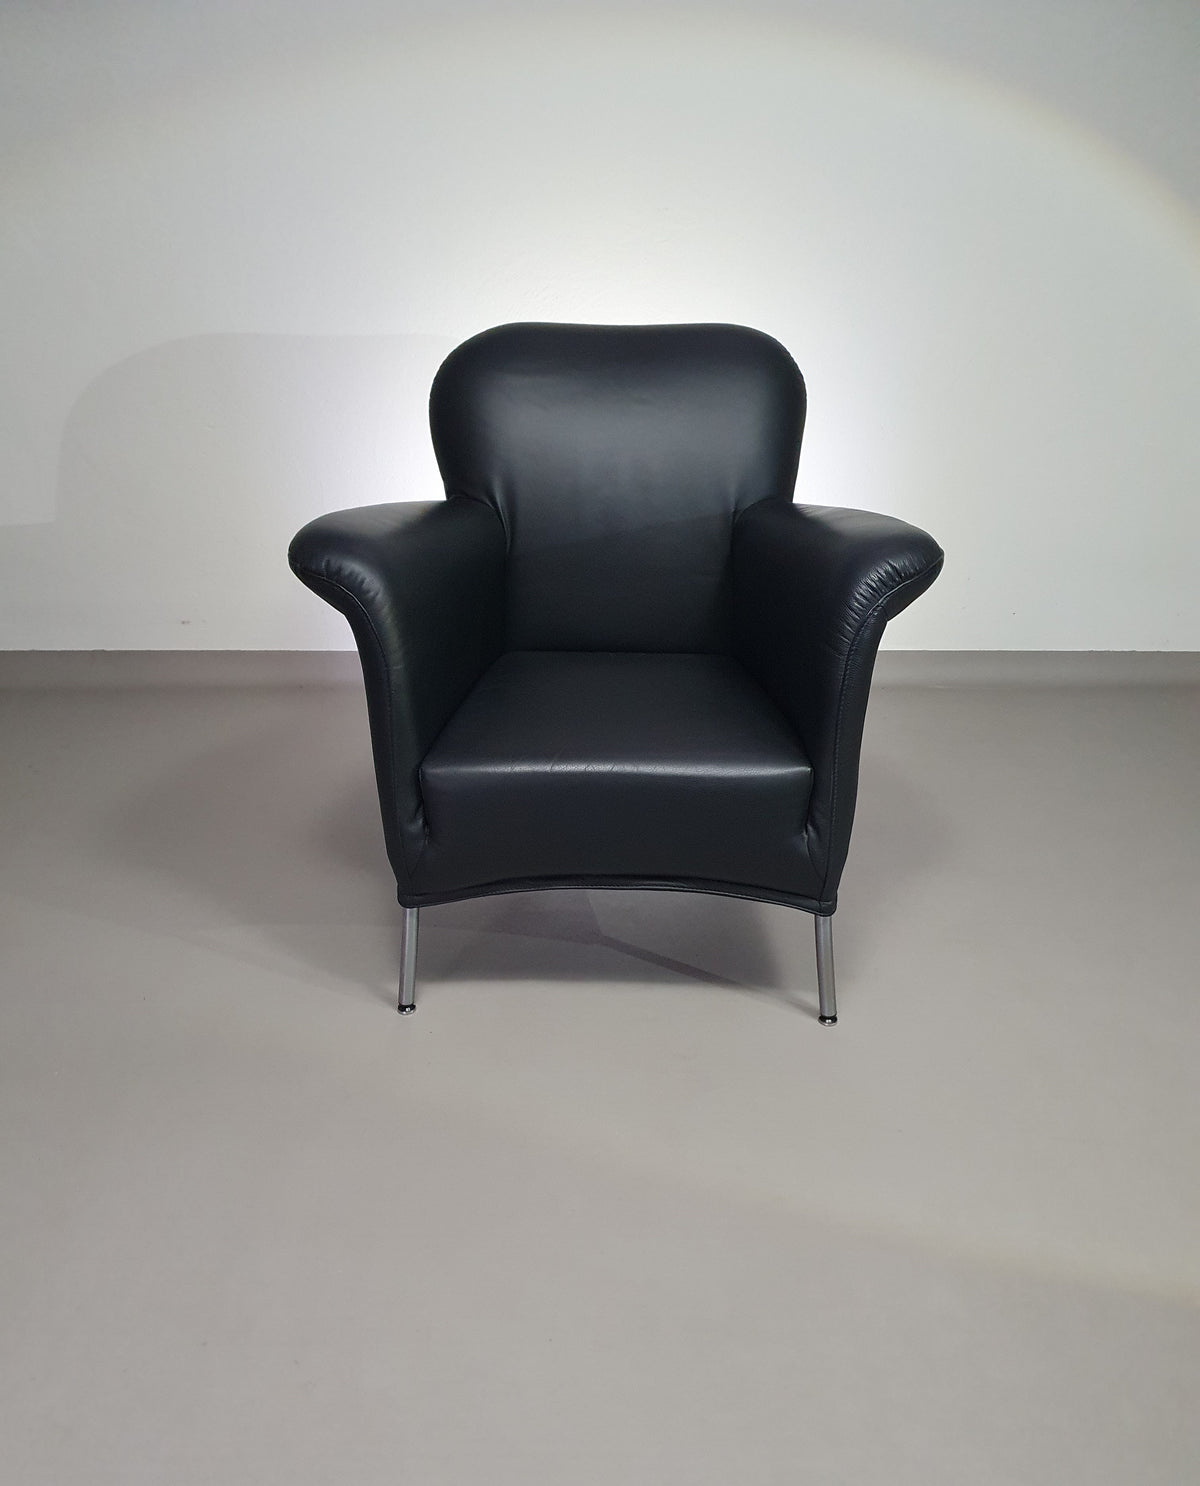 3 x rare Fauteuil/ model Turn /black leather / Bert Plantagie in mint condition.